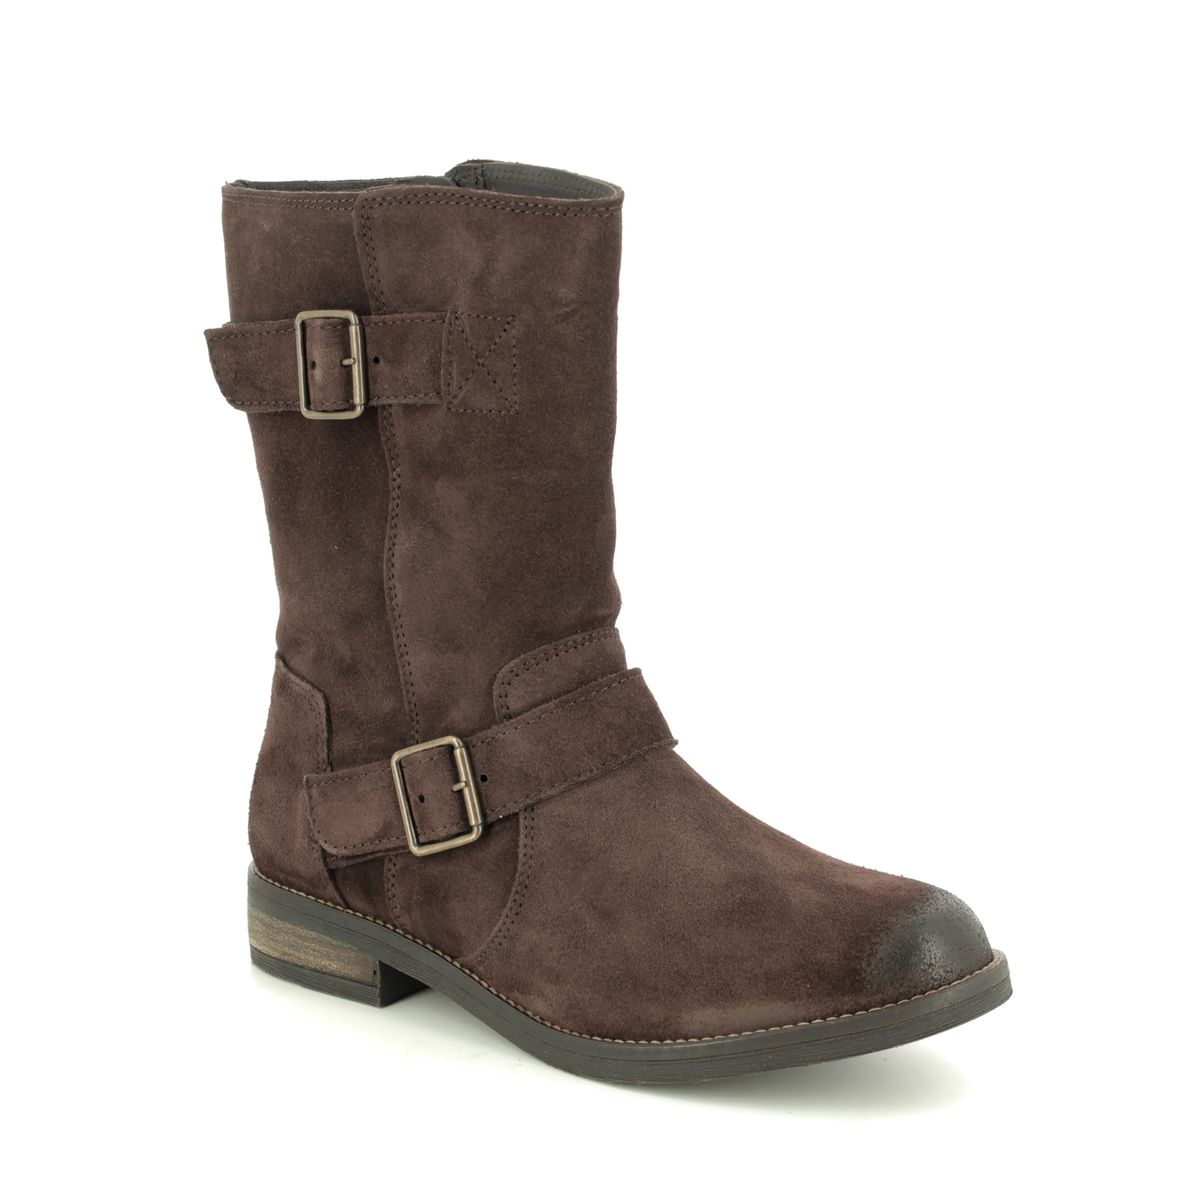 clarks brown boots womens